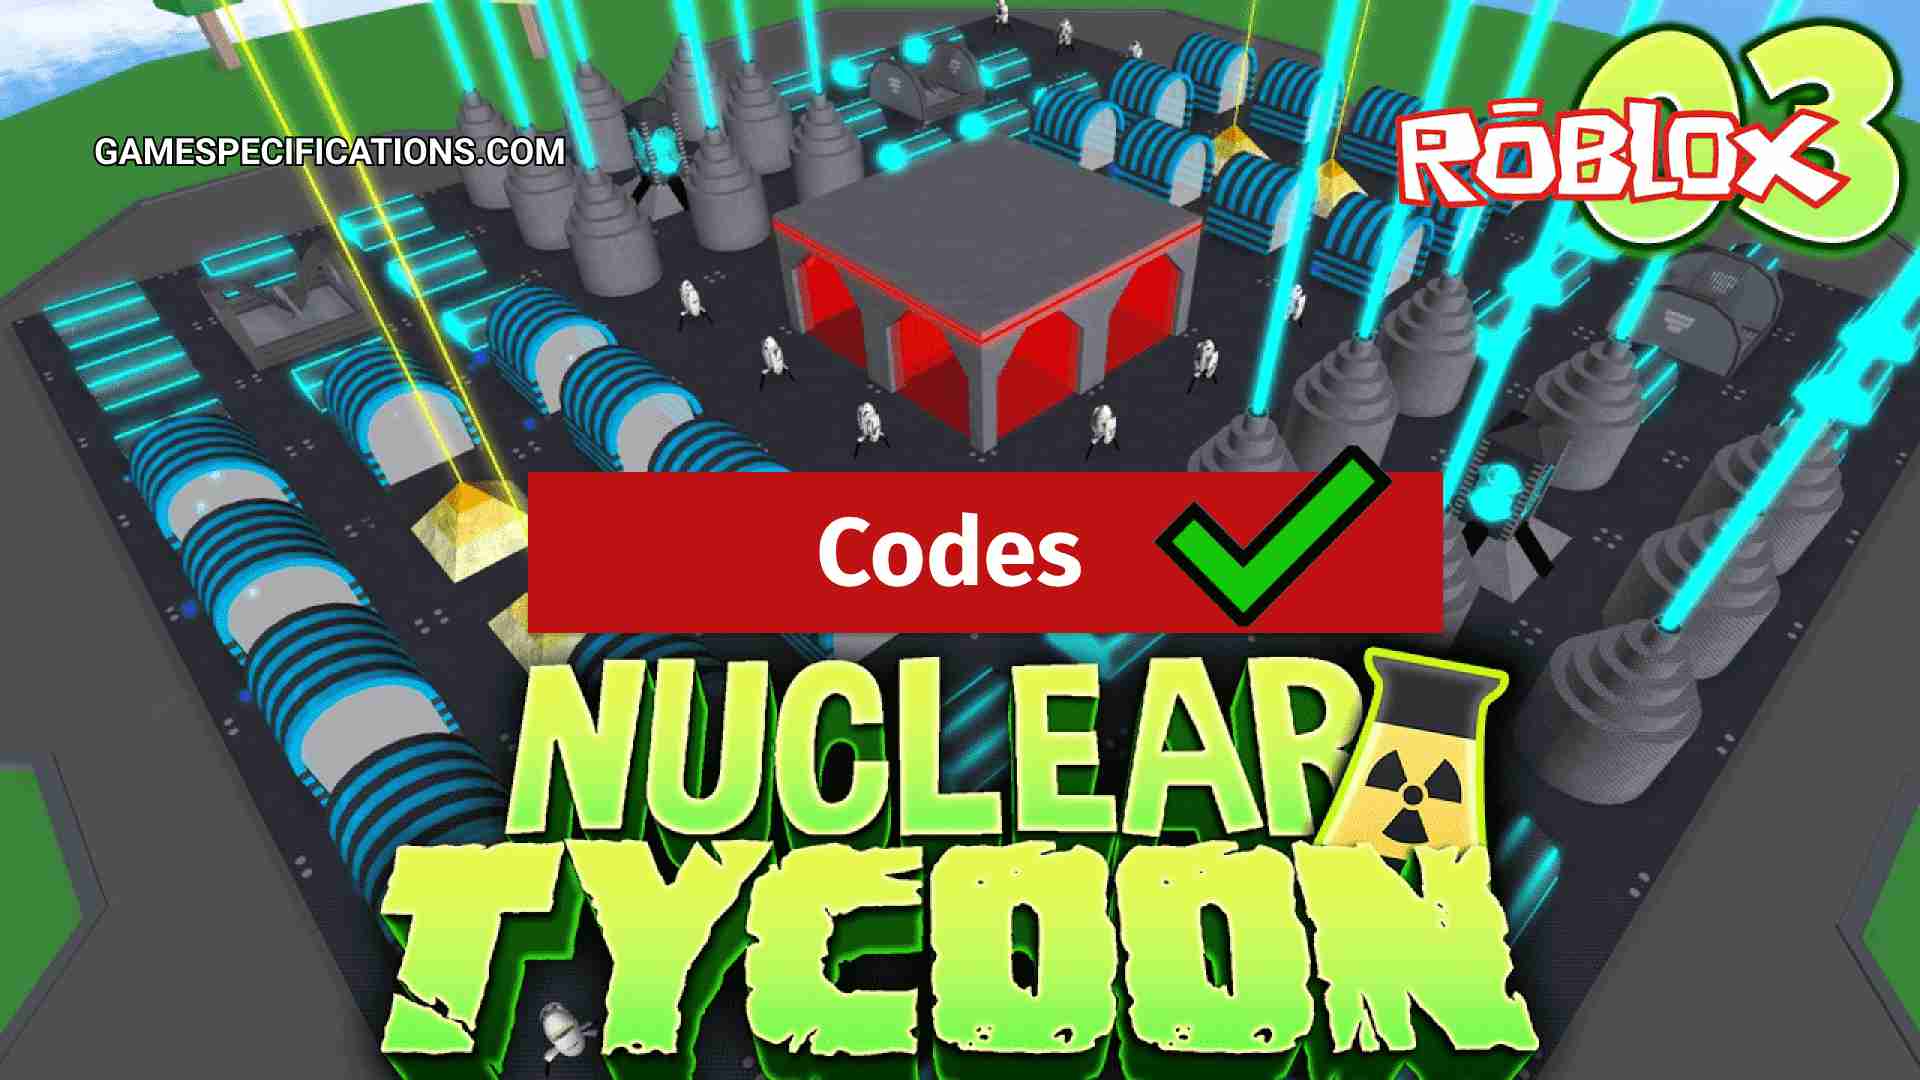 Roblox Nuclear Plant Tycoon Codes July 2021 Game Specifications - roblox pet shot tycoon code